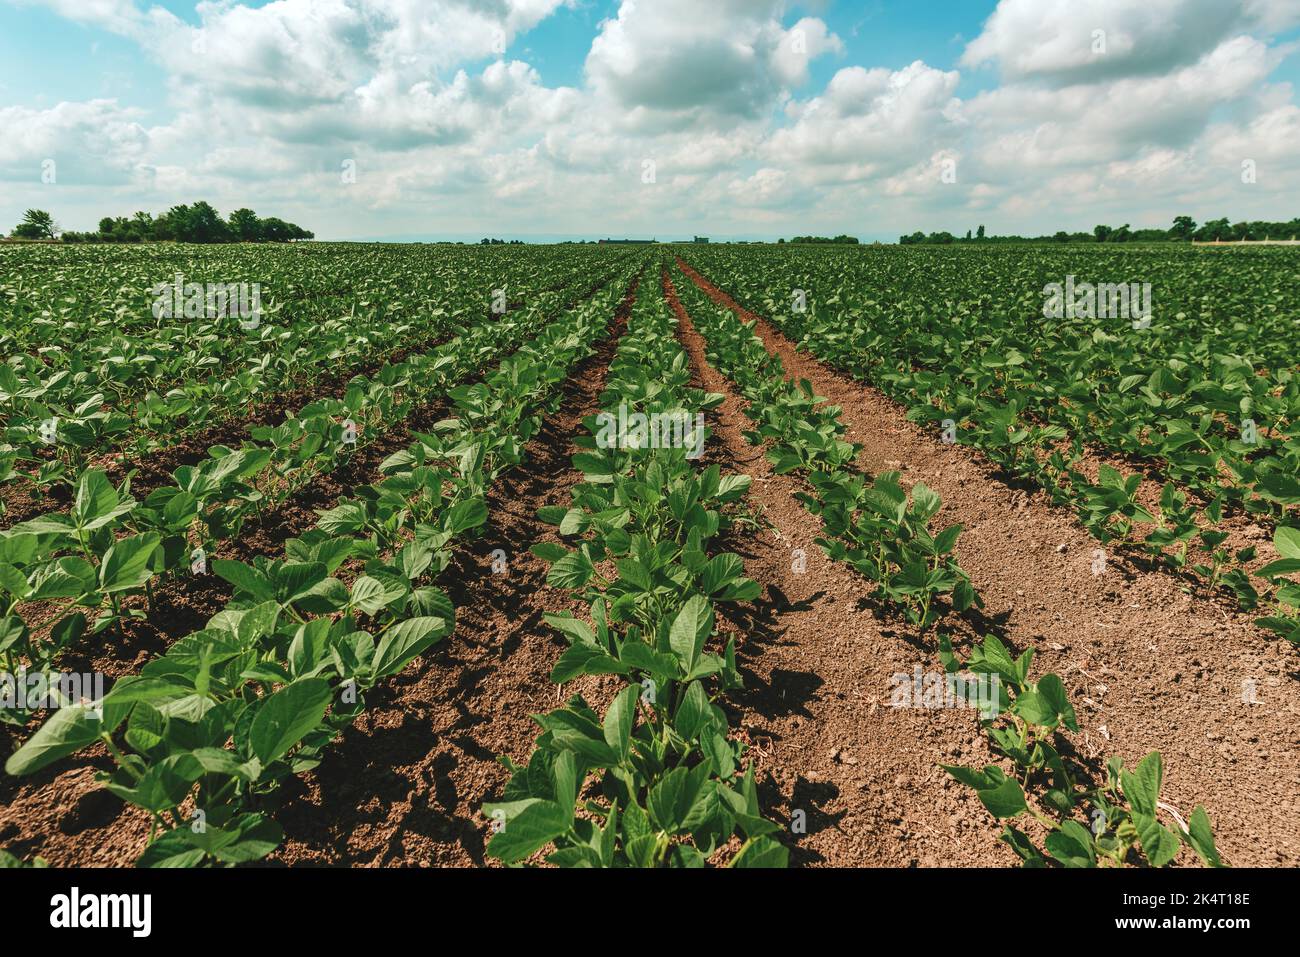 Young green soybean crop seedling plants in cultivated perfectly clean agricultural plantation field, selective focus Stock Photo